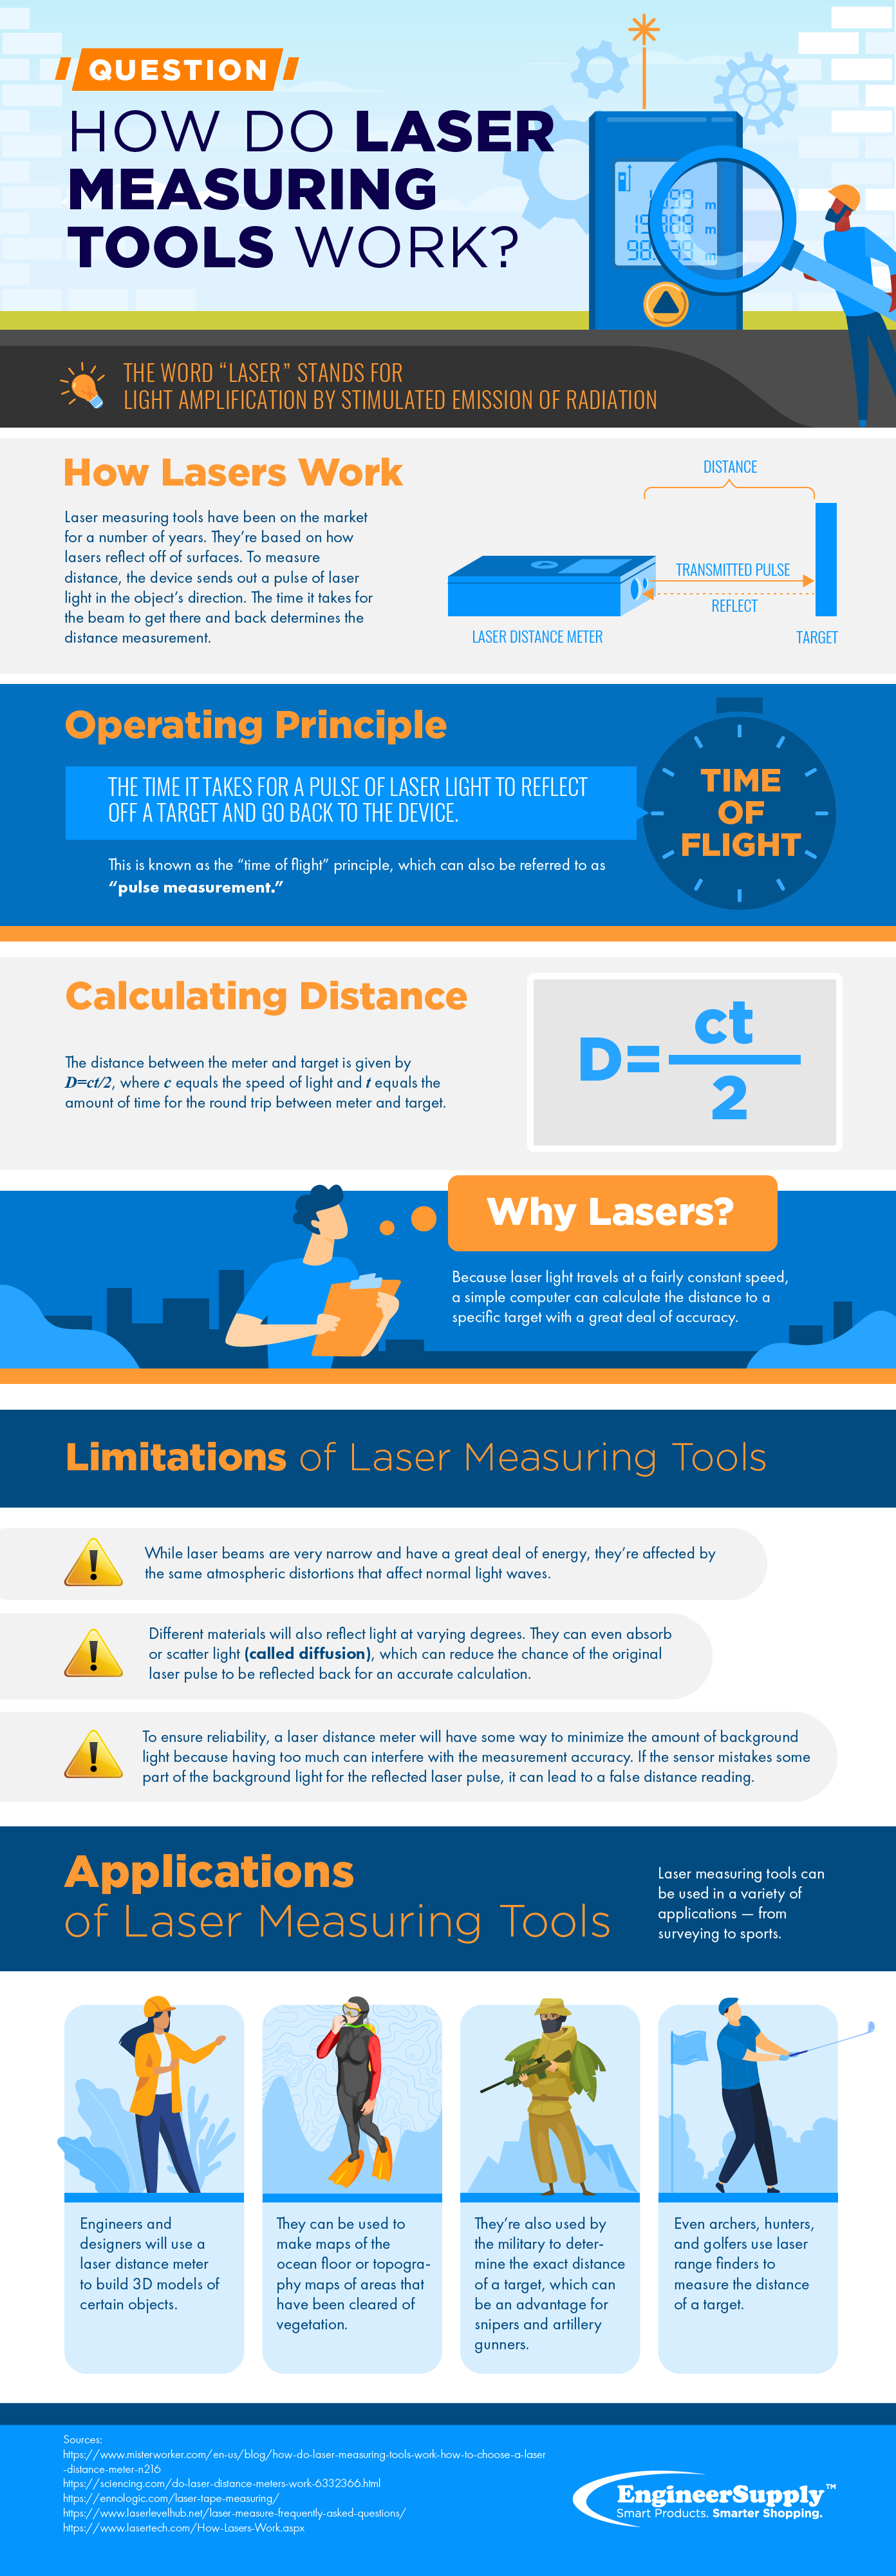 How DO Laser Measuring tools work